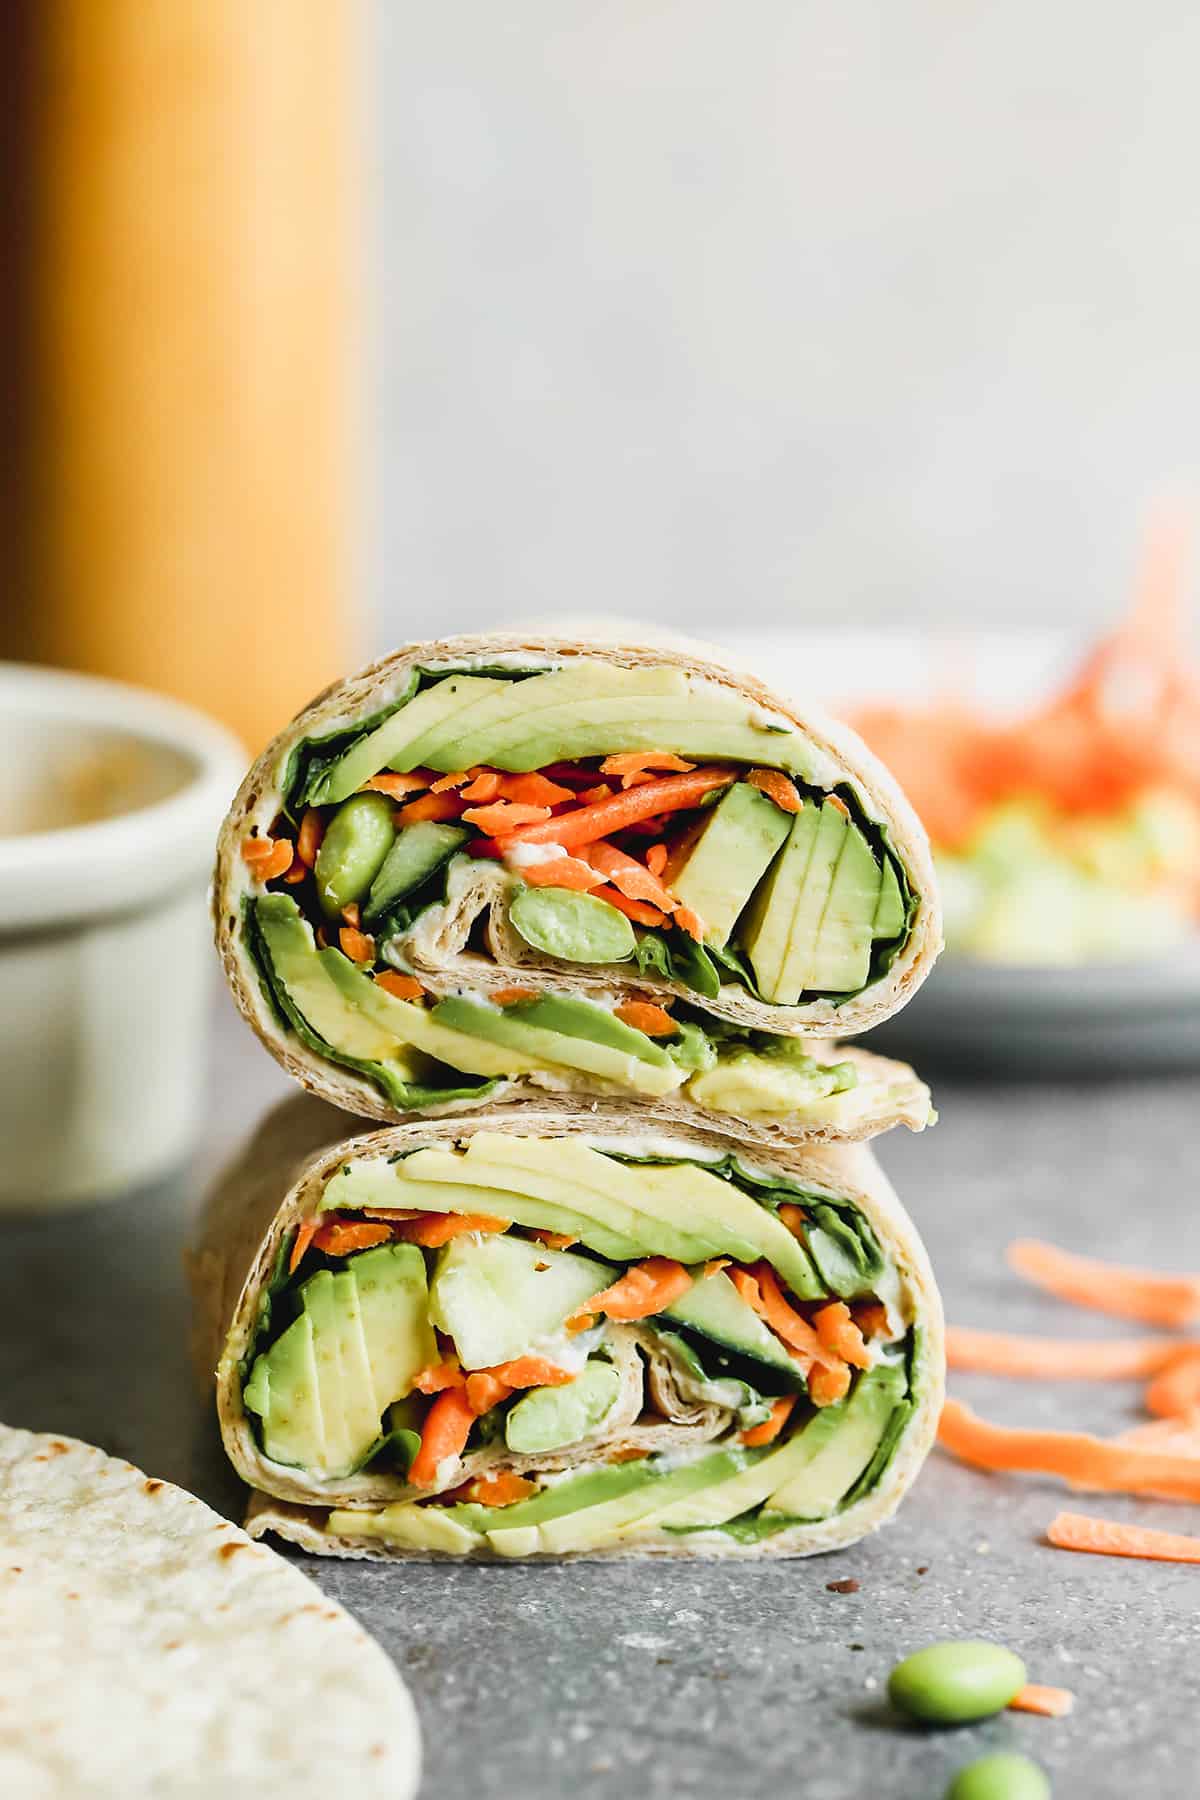 A veggie wrap sliced in half and stacked on top of each other to show the lettuce, avocado, cucumber, snap peas, and shredded carrots inside.